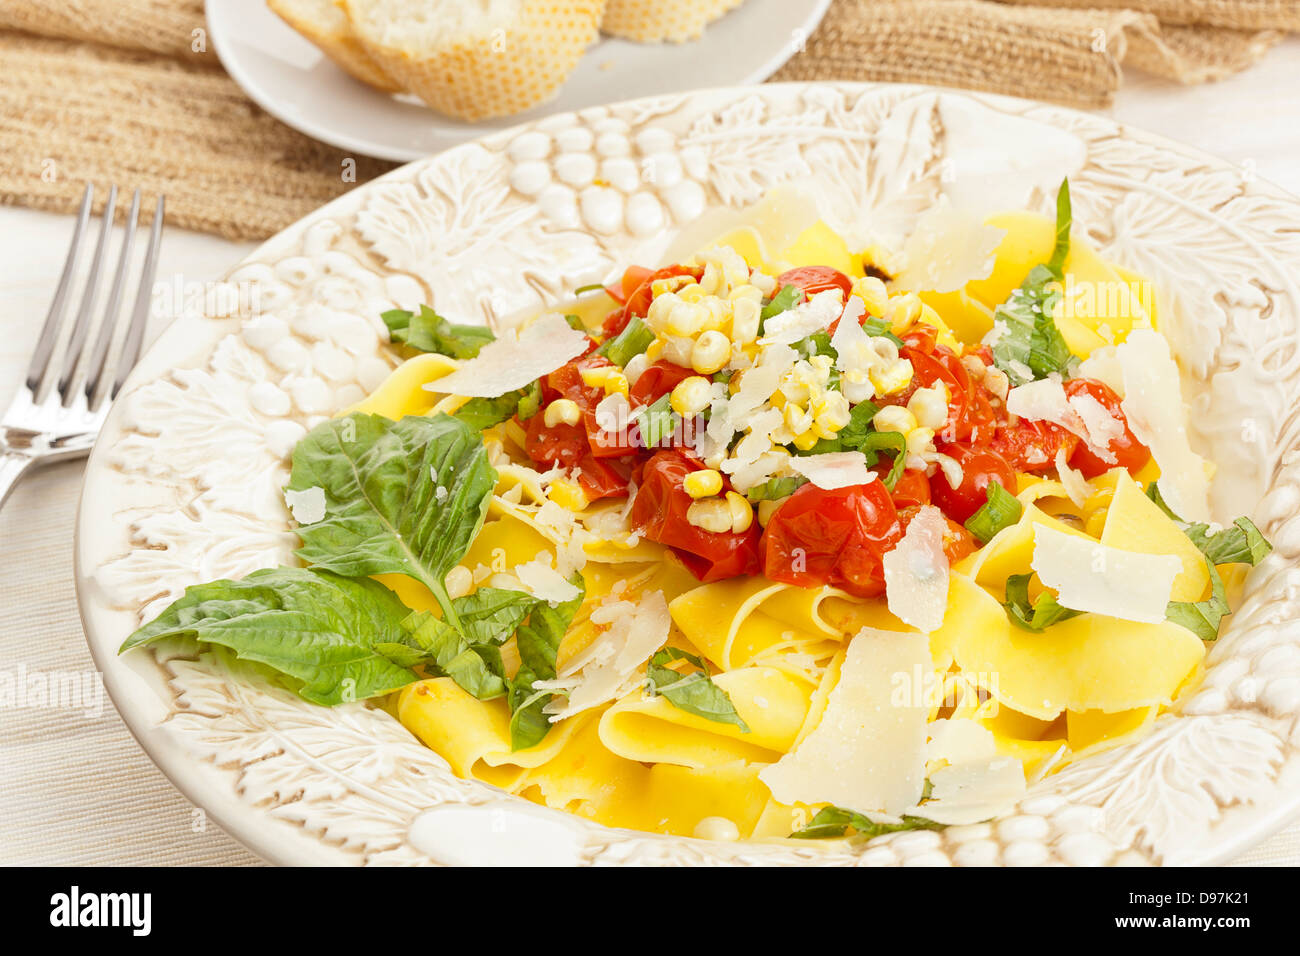 https://c8.alamy.com/comp/D97K21/homemade-pappardelle-pasta-with-corn-and-tomatoes-D97K21.jpg